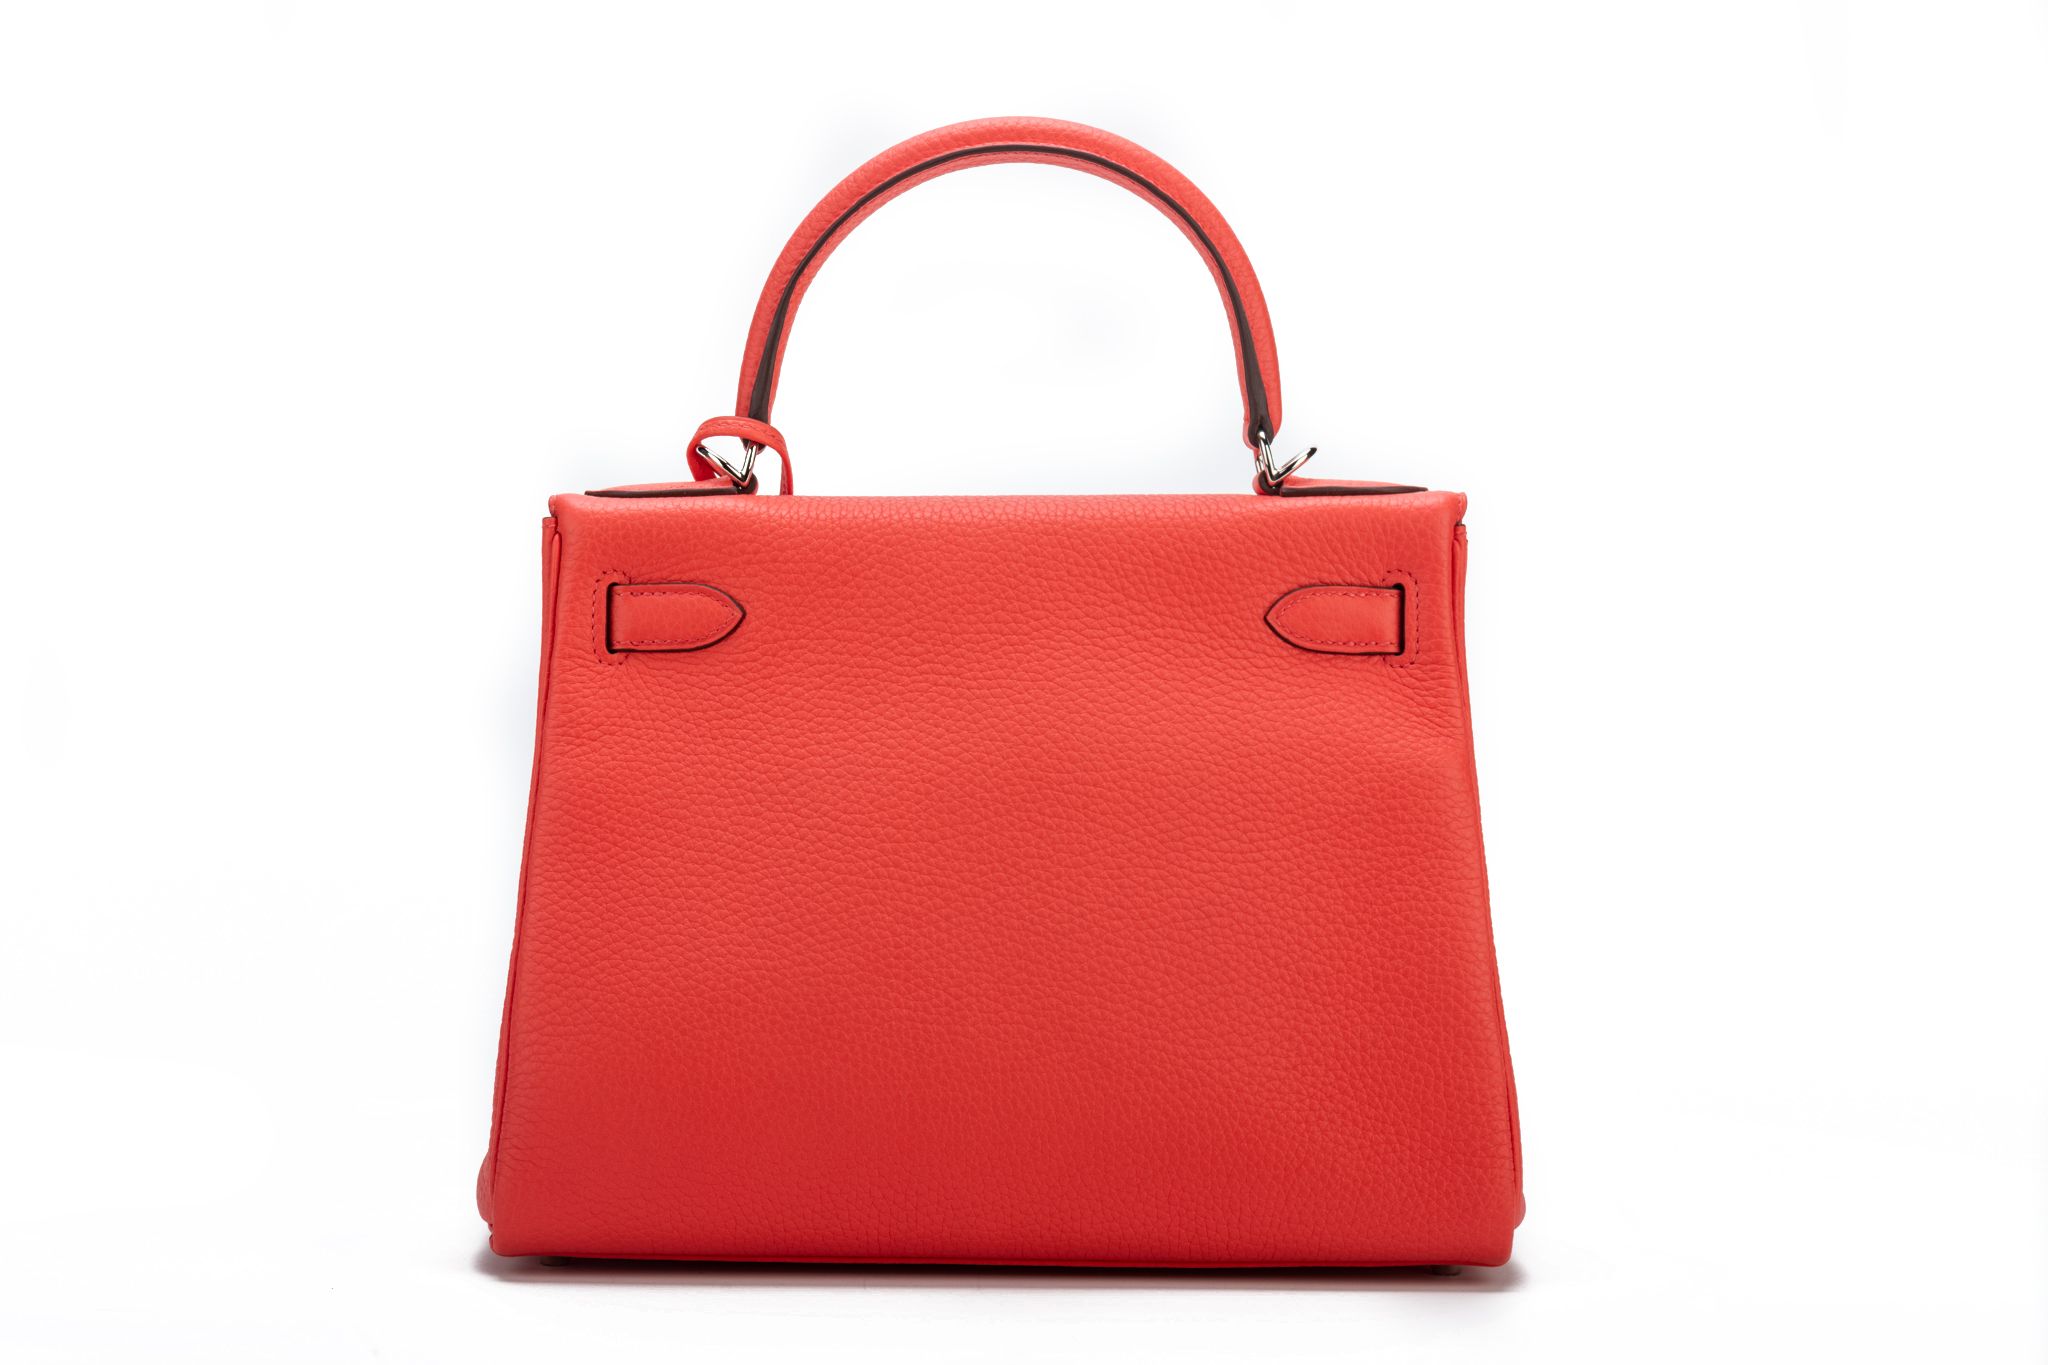 A ROUGE PIVOINE EPSOM LEATHER KELLY POCHETTE WITH GOLD HARDWARE